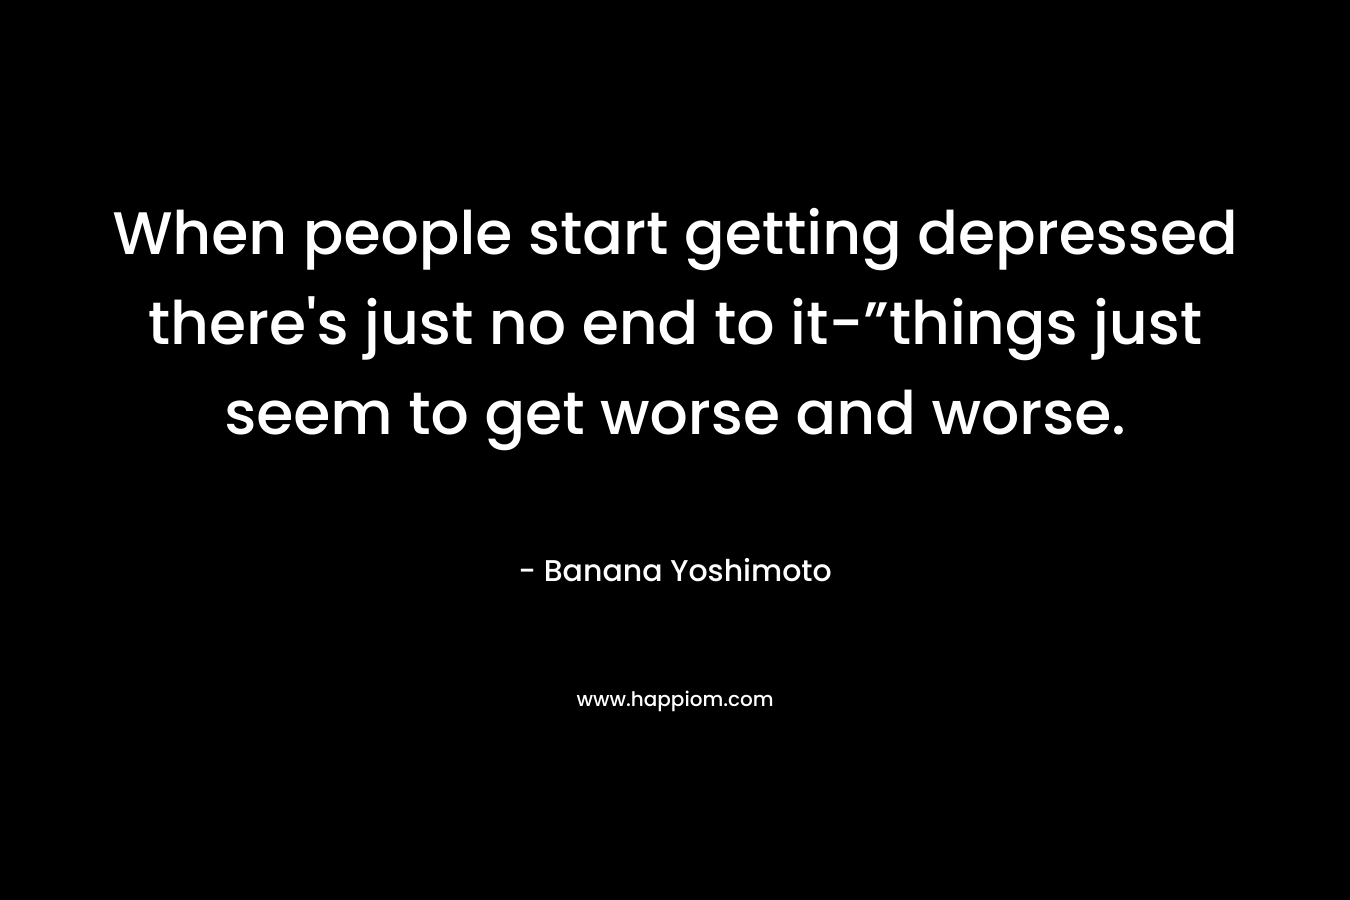 When people start getting depressed there’s just no end to it-”things just seem to get worse and worse. – Banana Yoshimoto